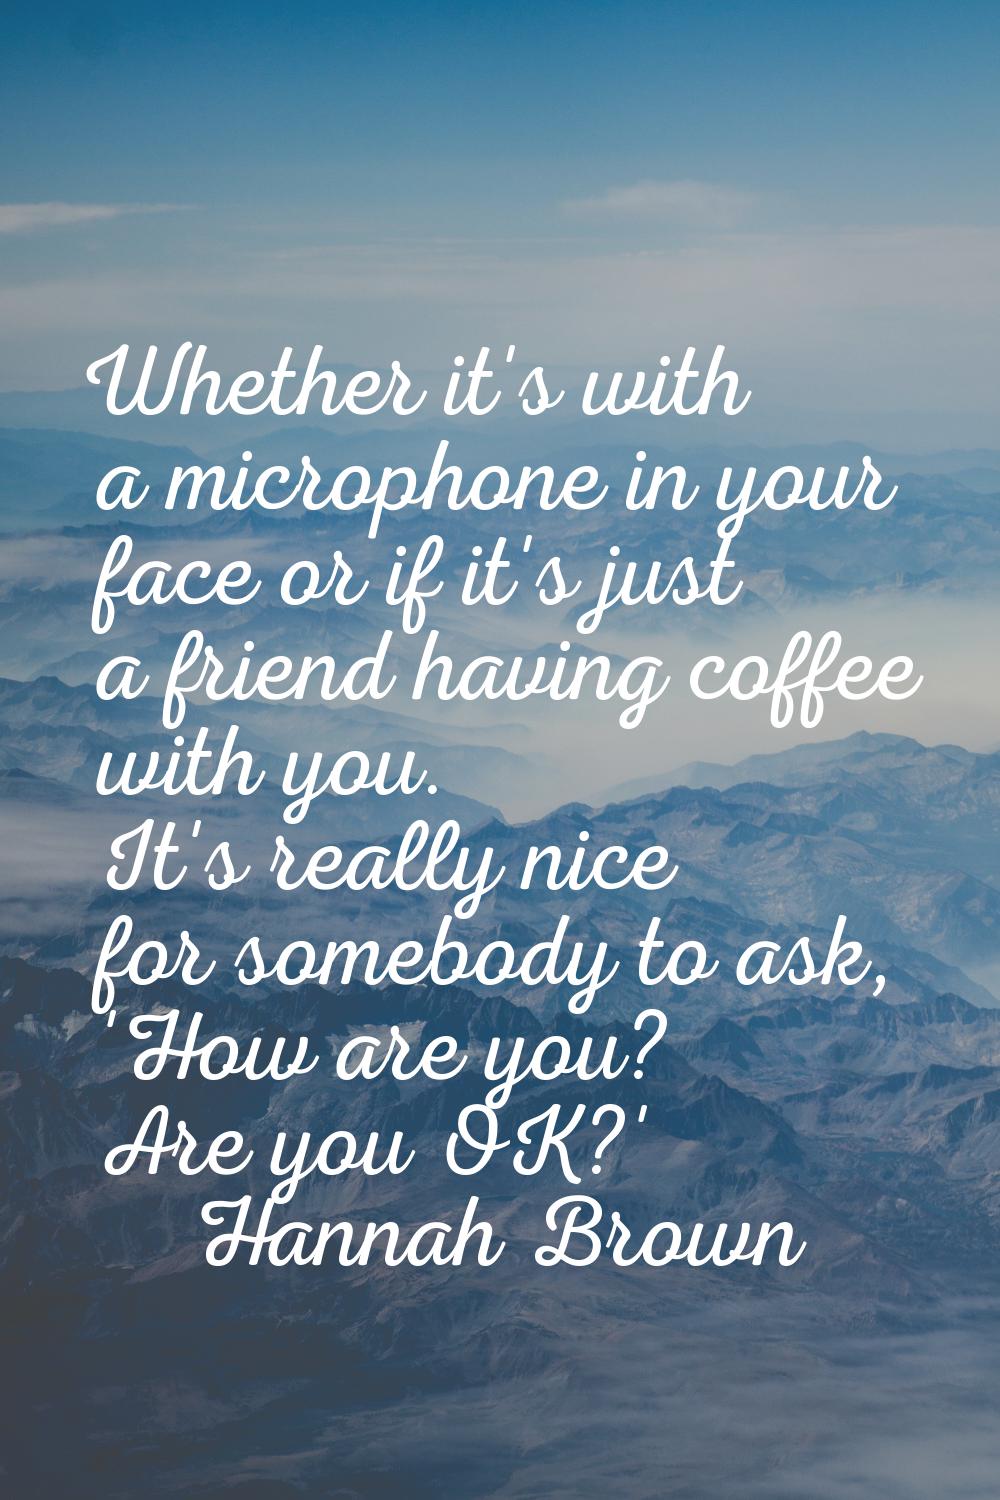 Whether it's with a microphone in your face or if it's just a friend having coffee with you. It's r